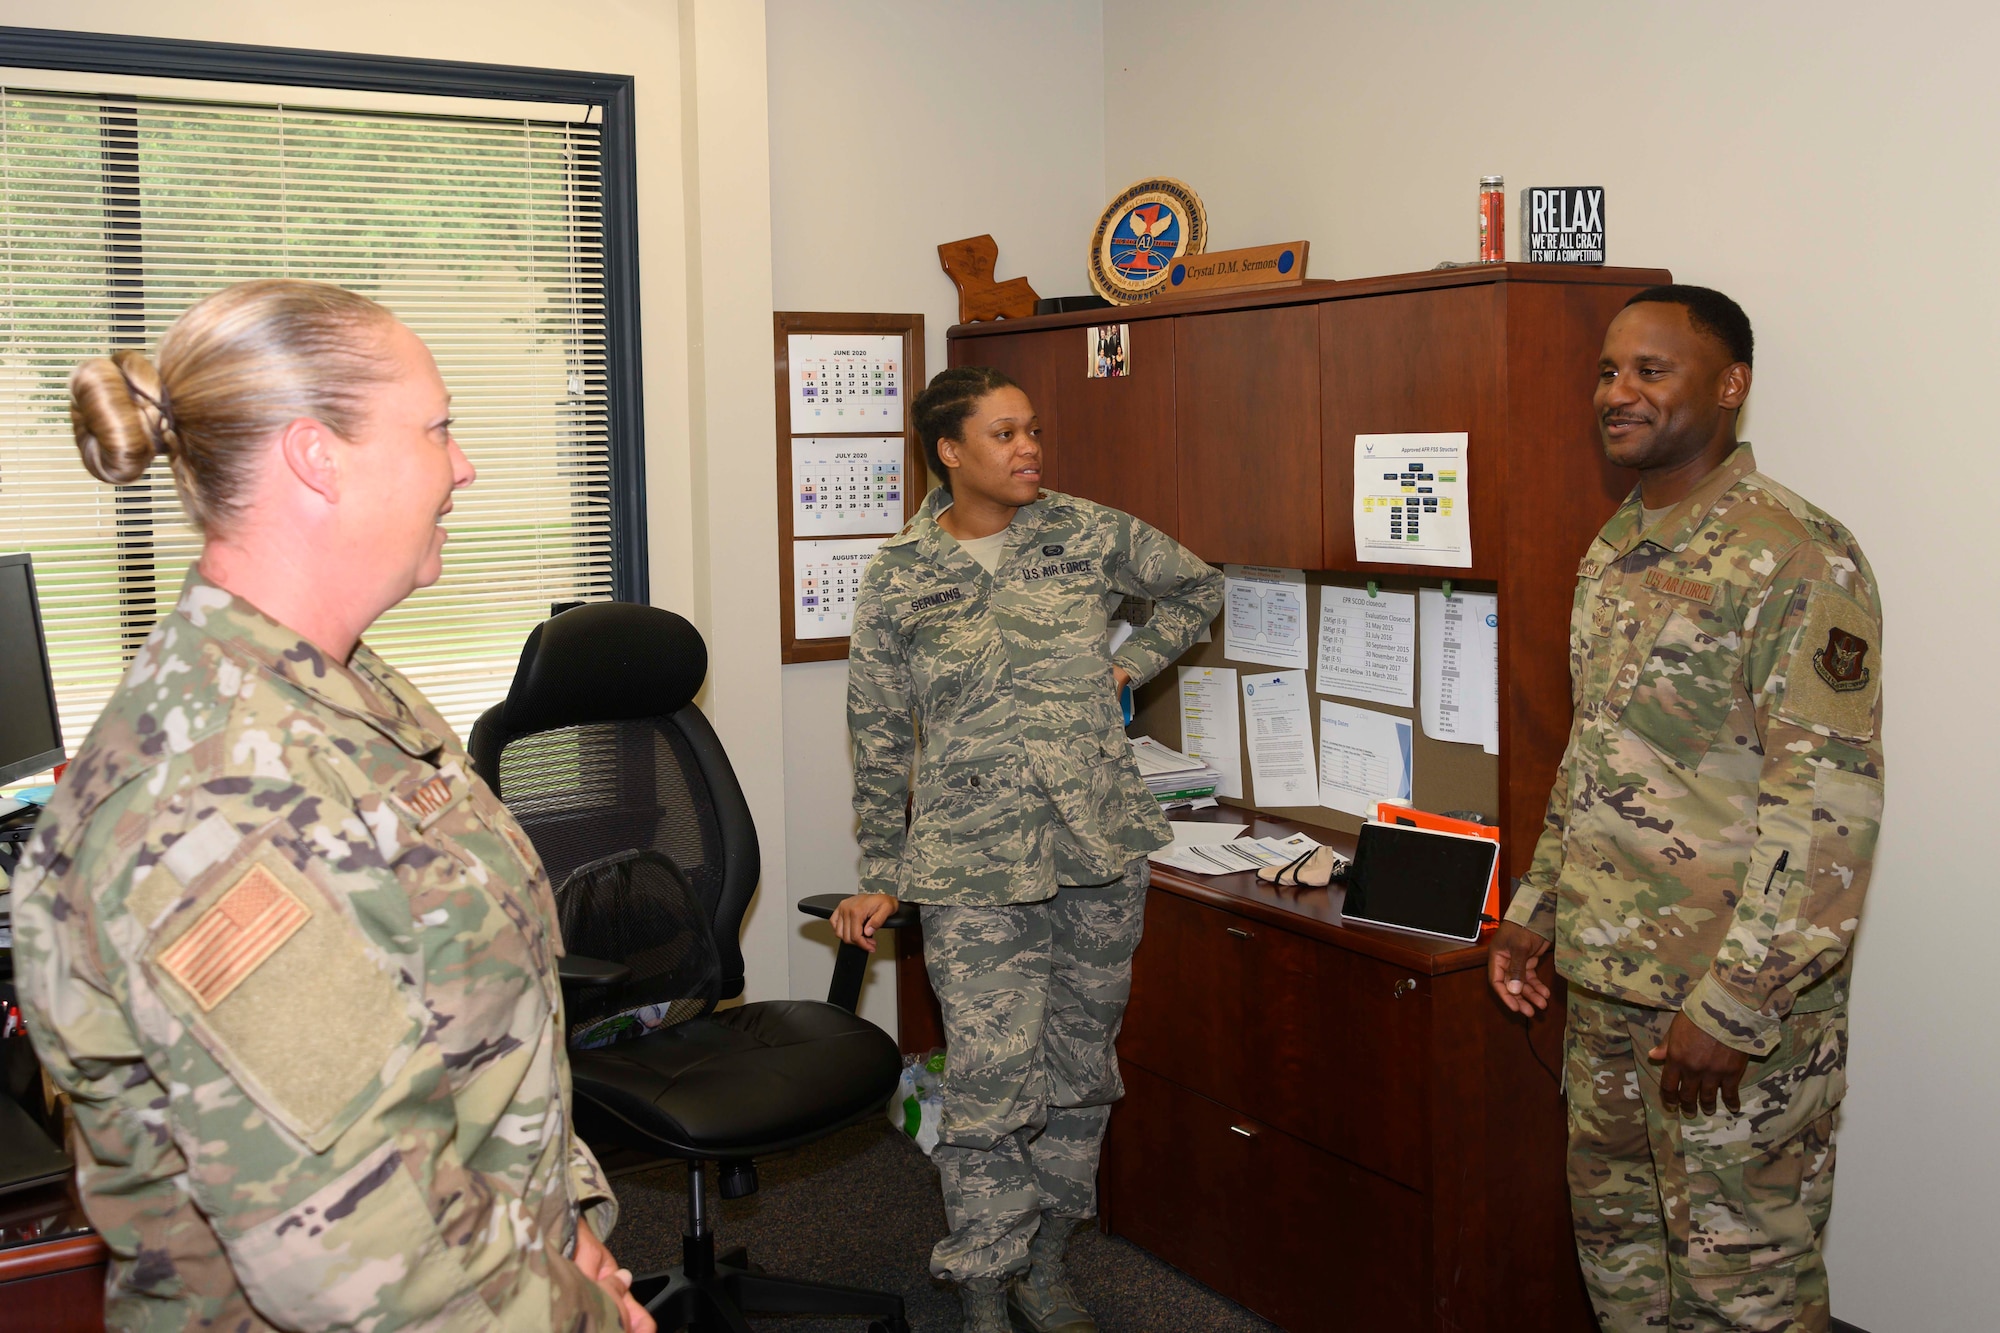 Three Airmen stand in an office, talking.